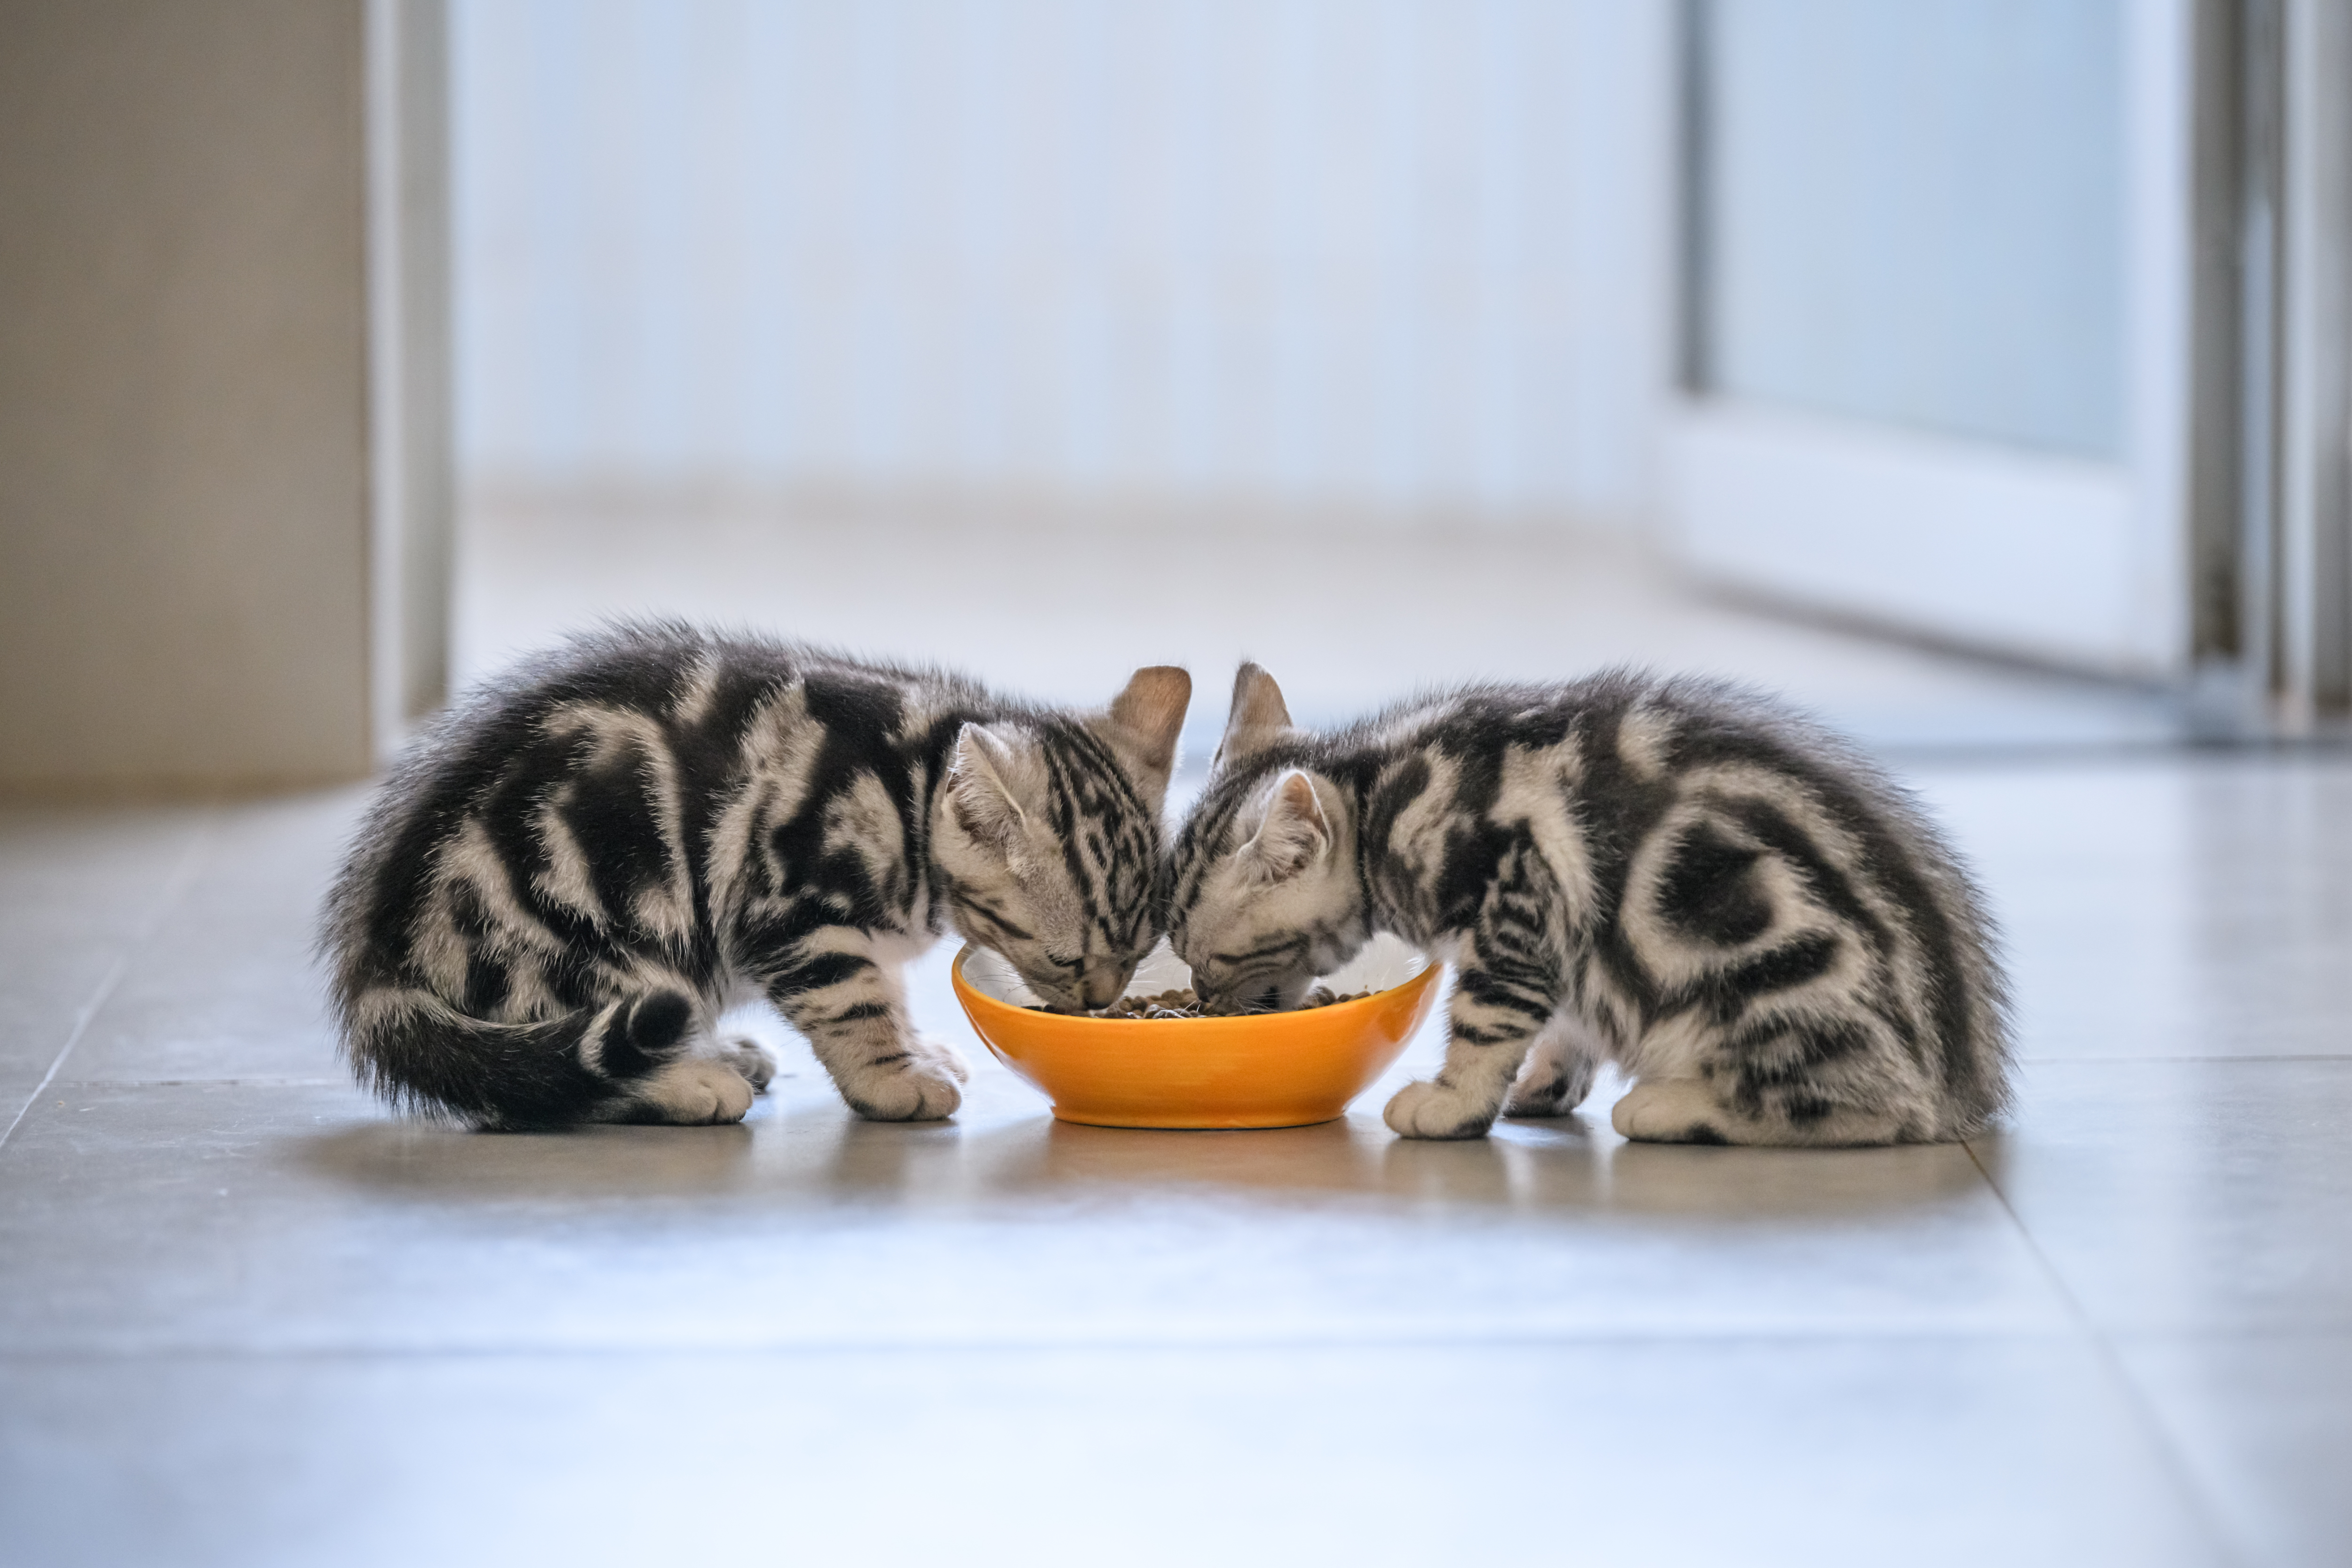 Cat ownership drives pet care growth in Latin America